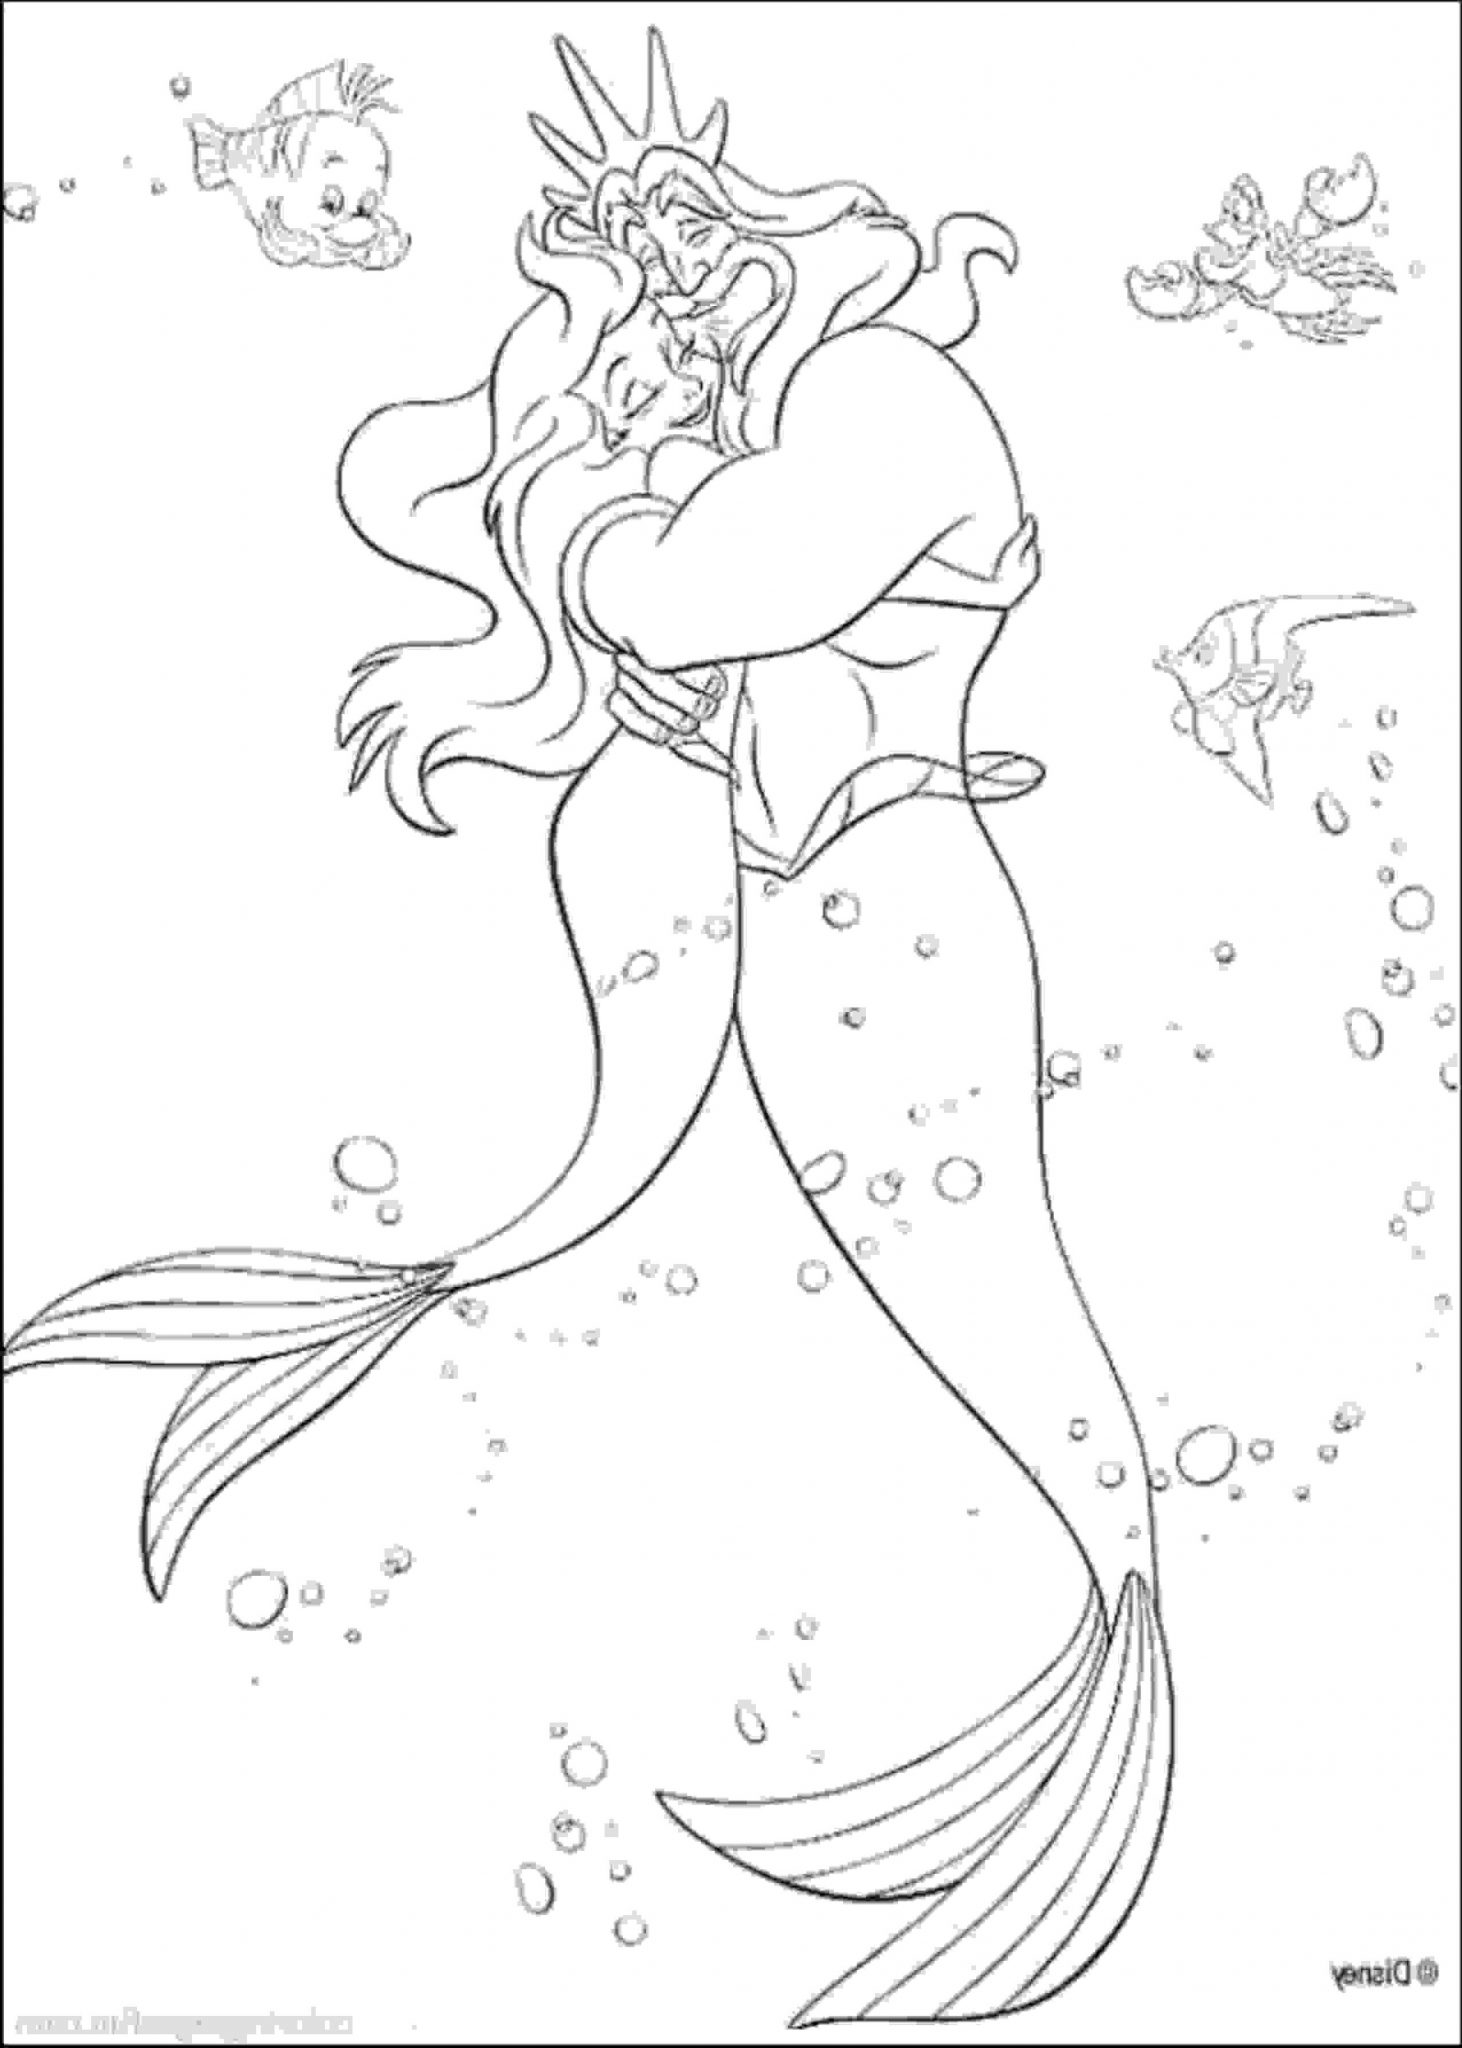 Print & Download - Find the Suitable Little Mermaid Coloring Pages for